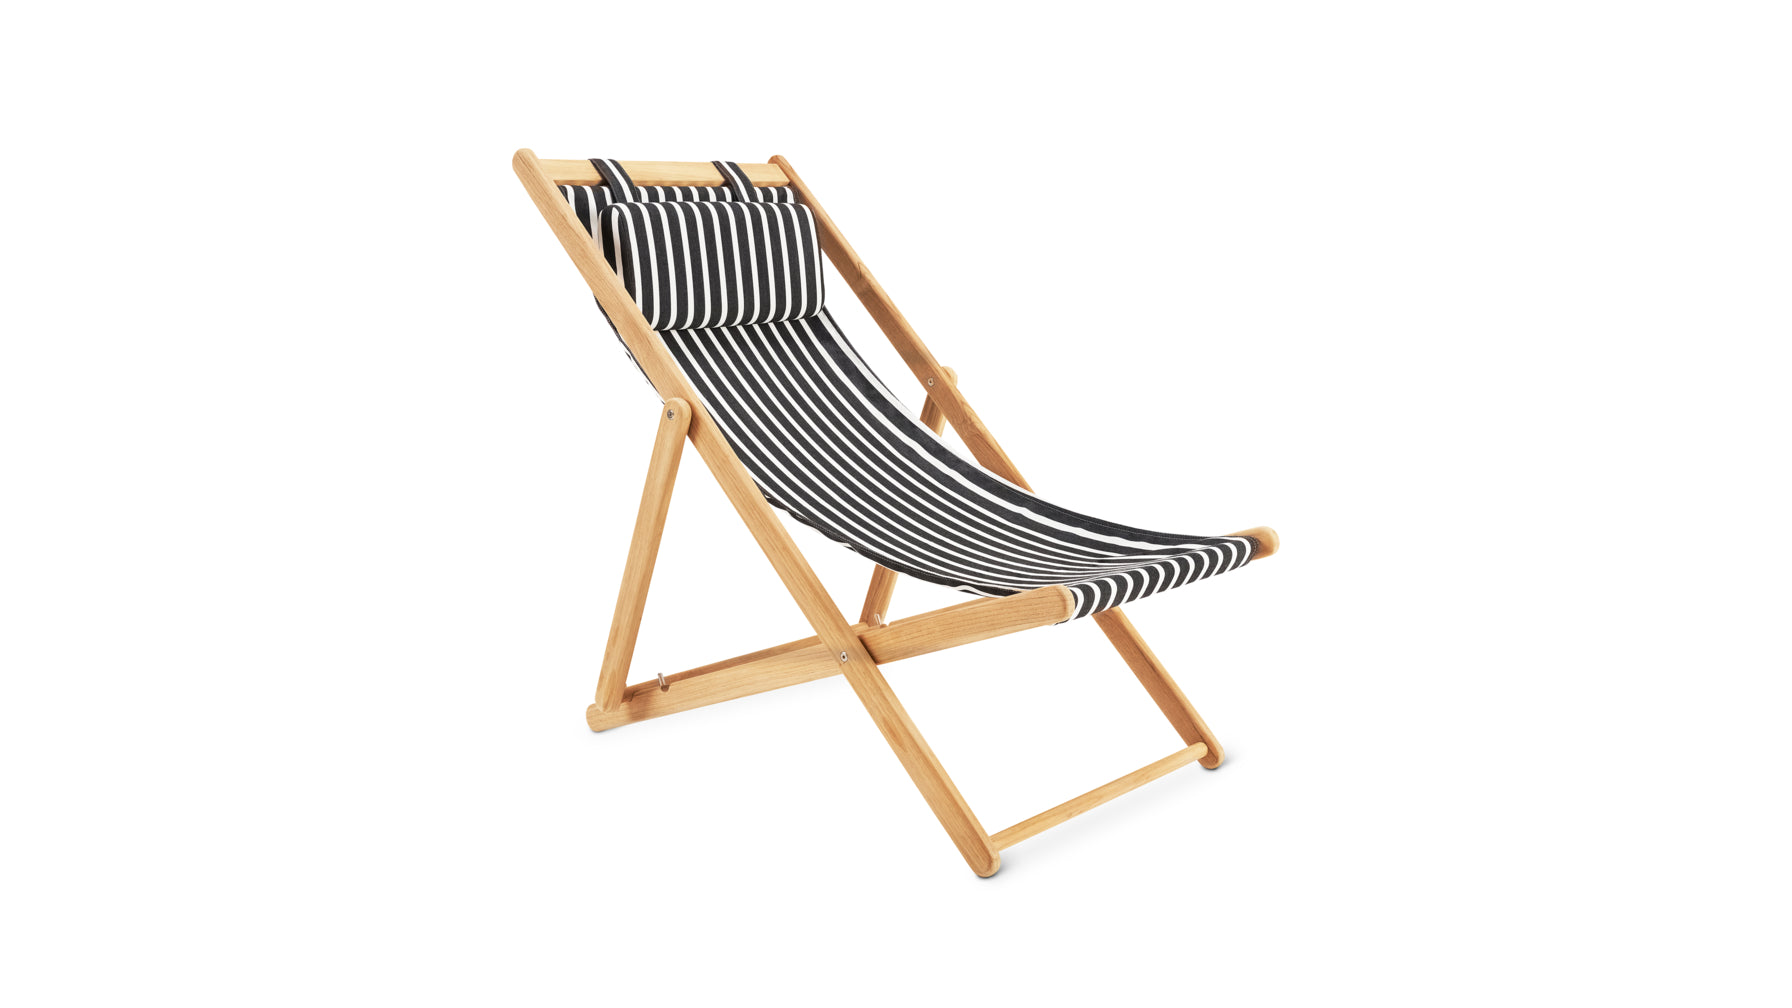 Settle In Outdoor Deck Chair, Black Sand - Image 4